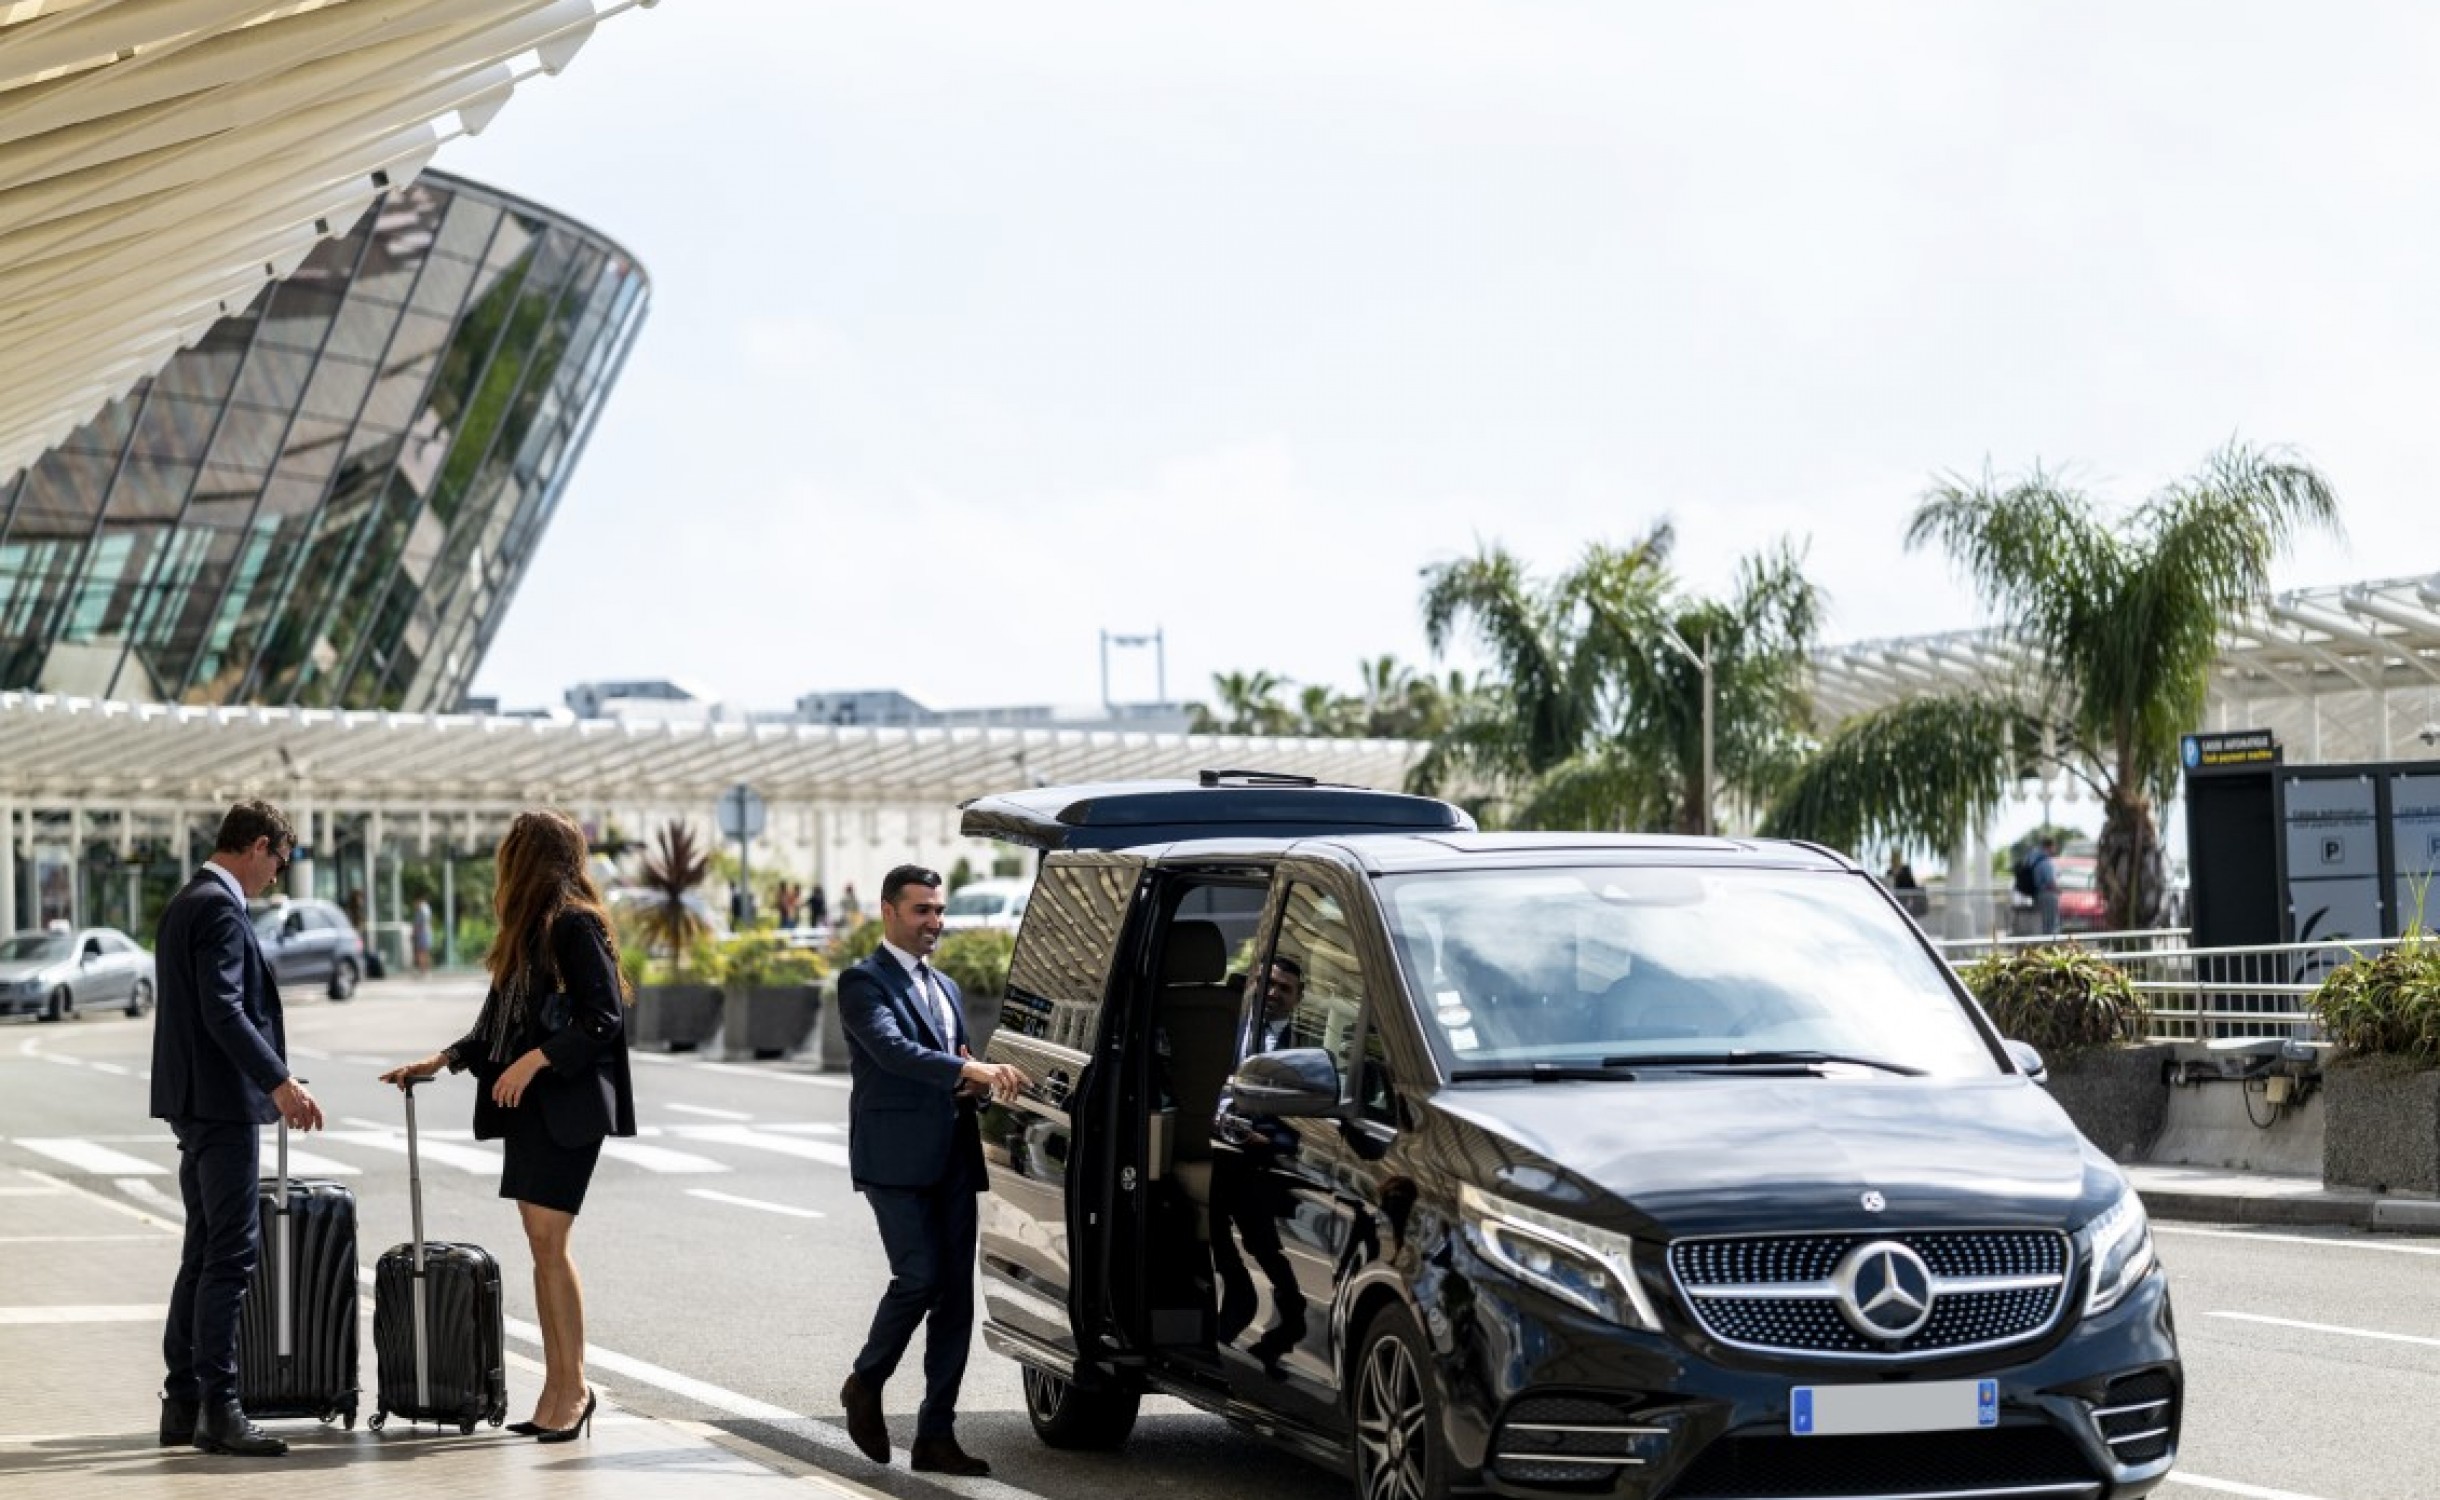 Airport Shuttle Italy Chauffeur service